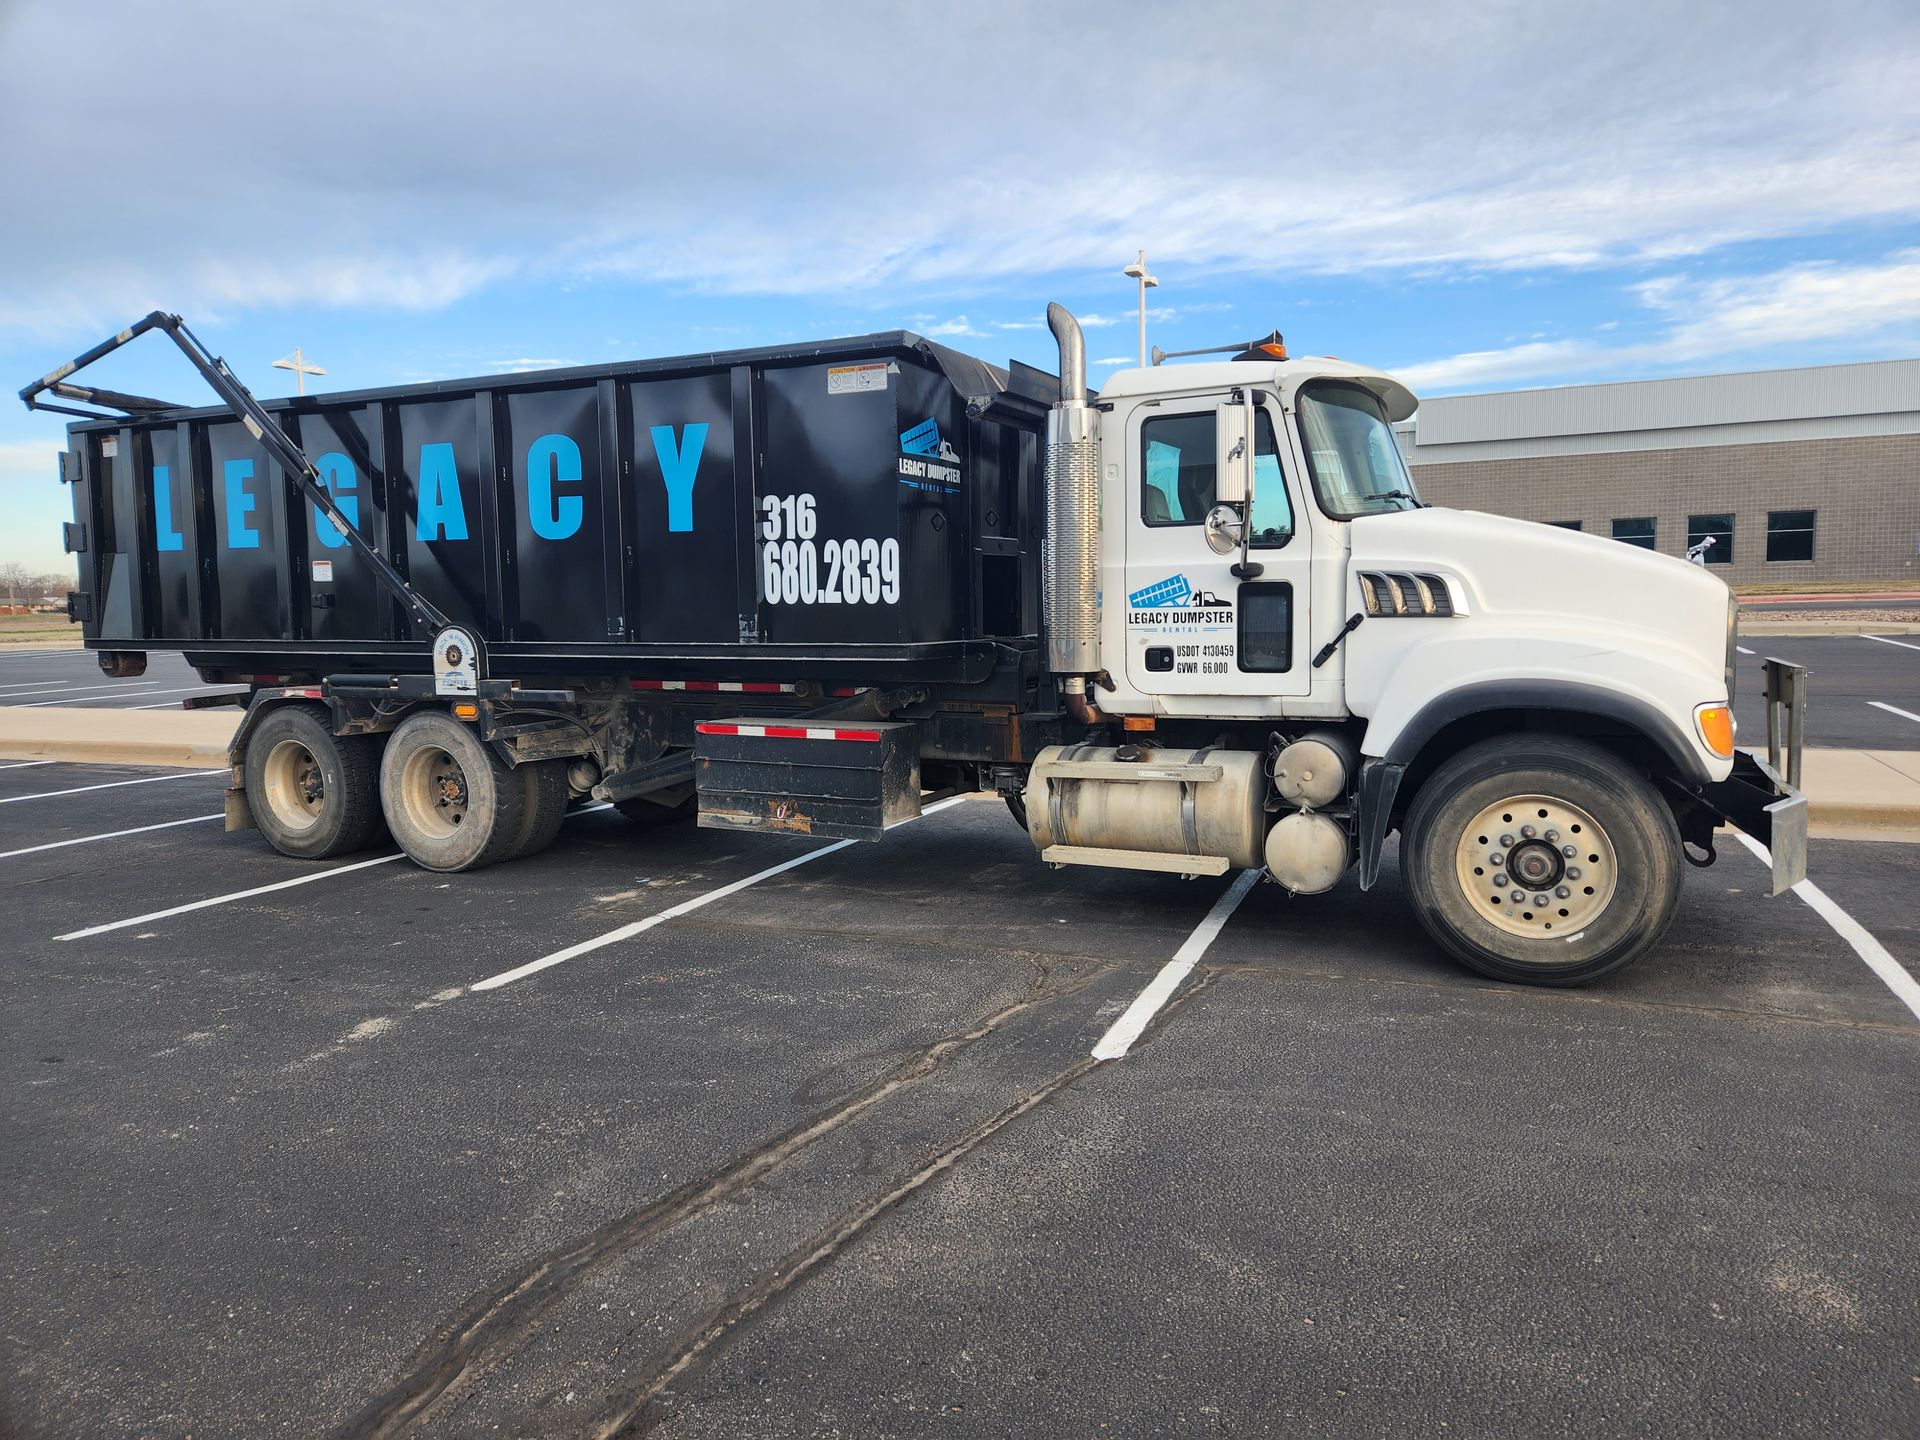 A dump truck is parked in a parking lot with a 30 yard dumpster on the back in wichita